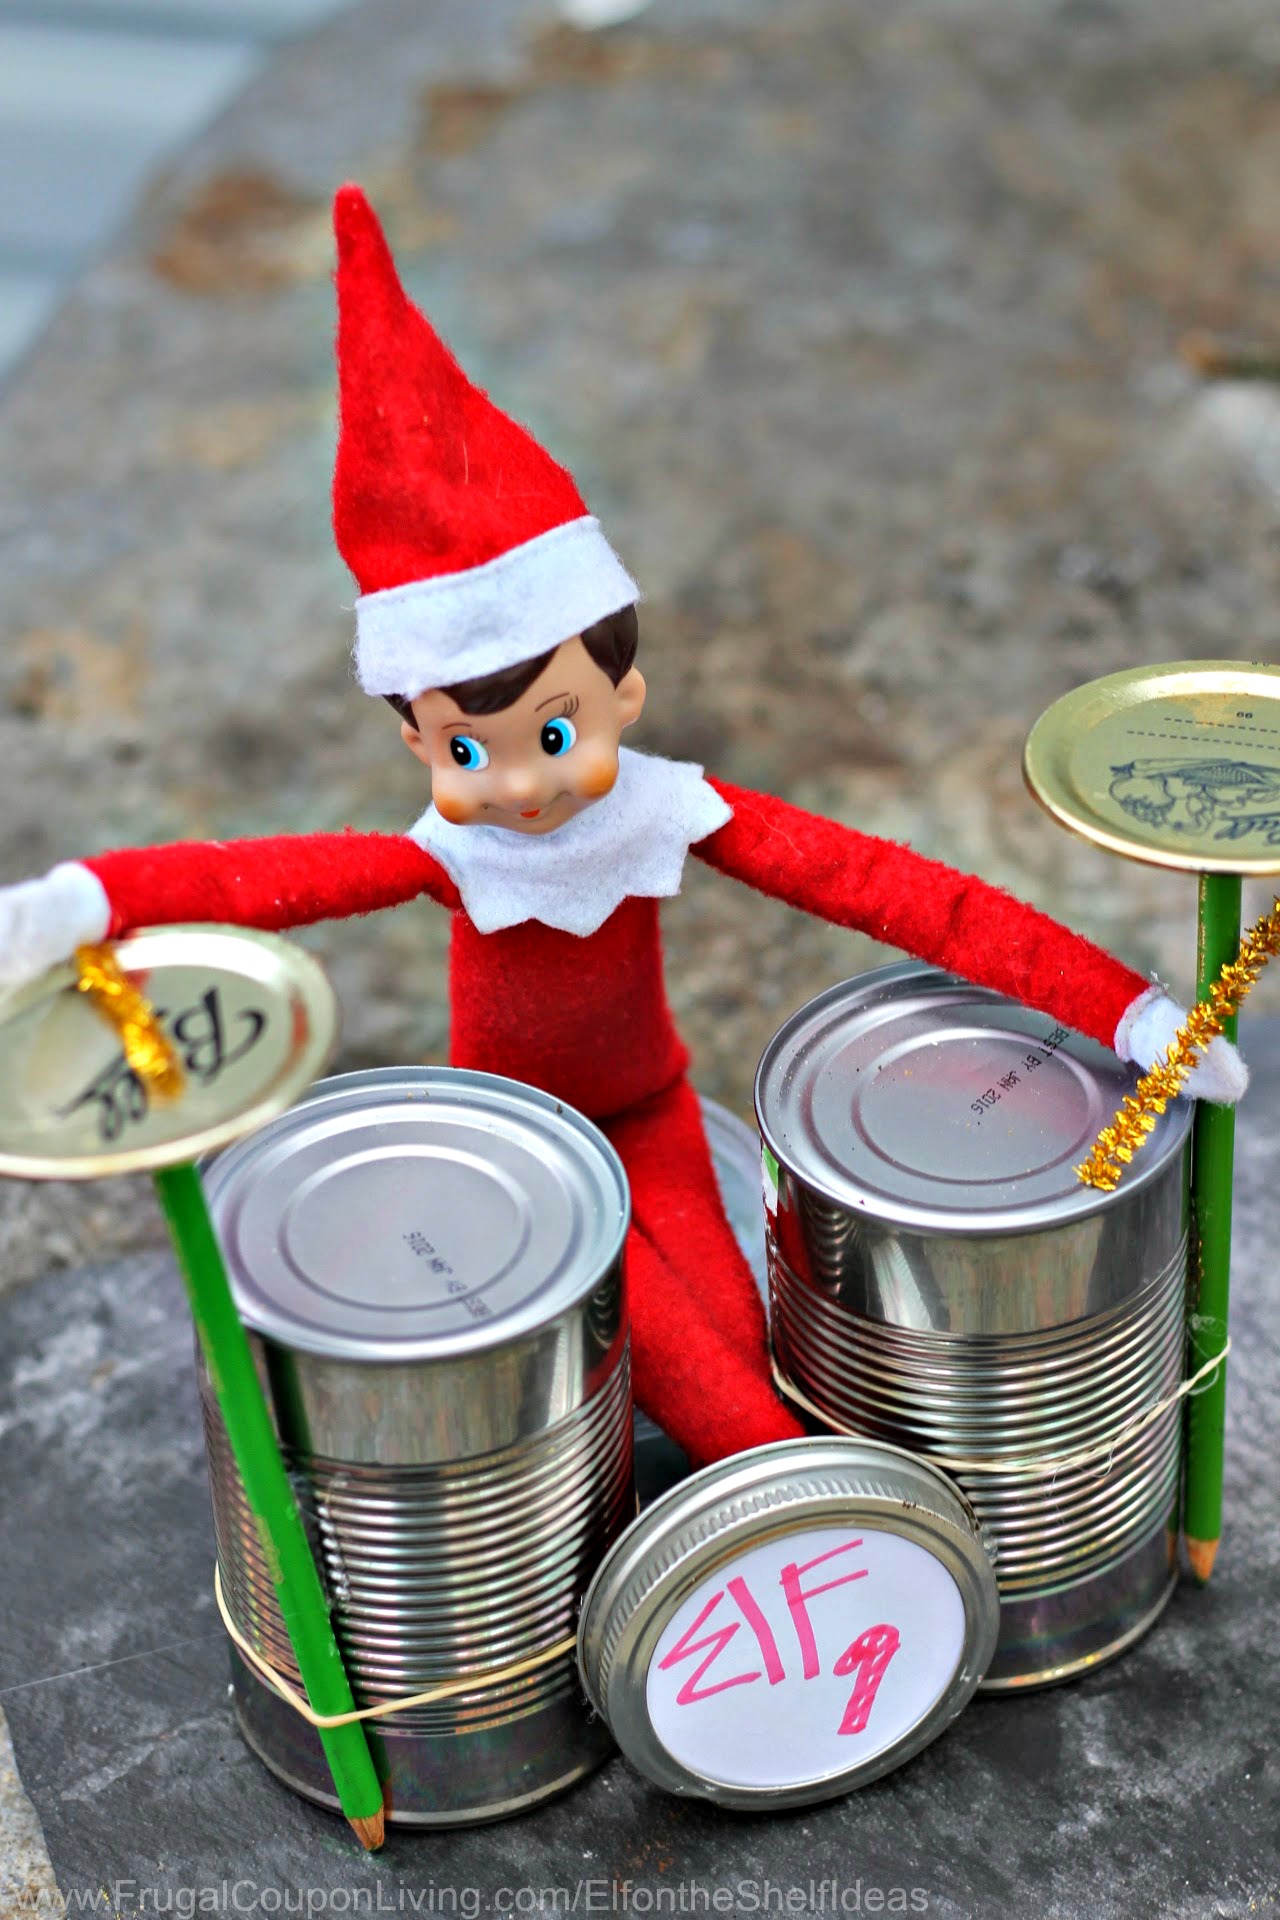 30 fun and unique Elf on the Shelf Ideas - Elf On the Shelf Rock Band Drums